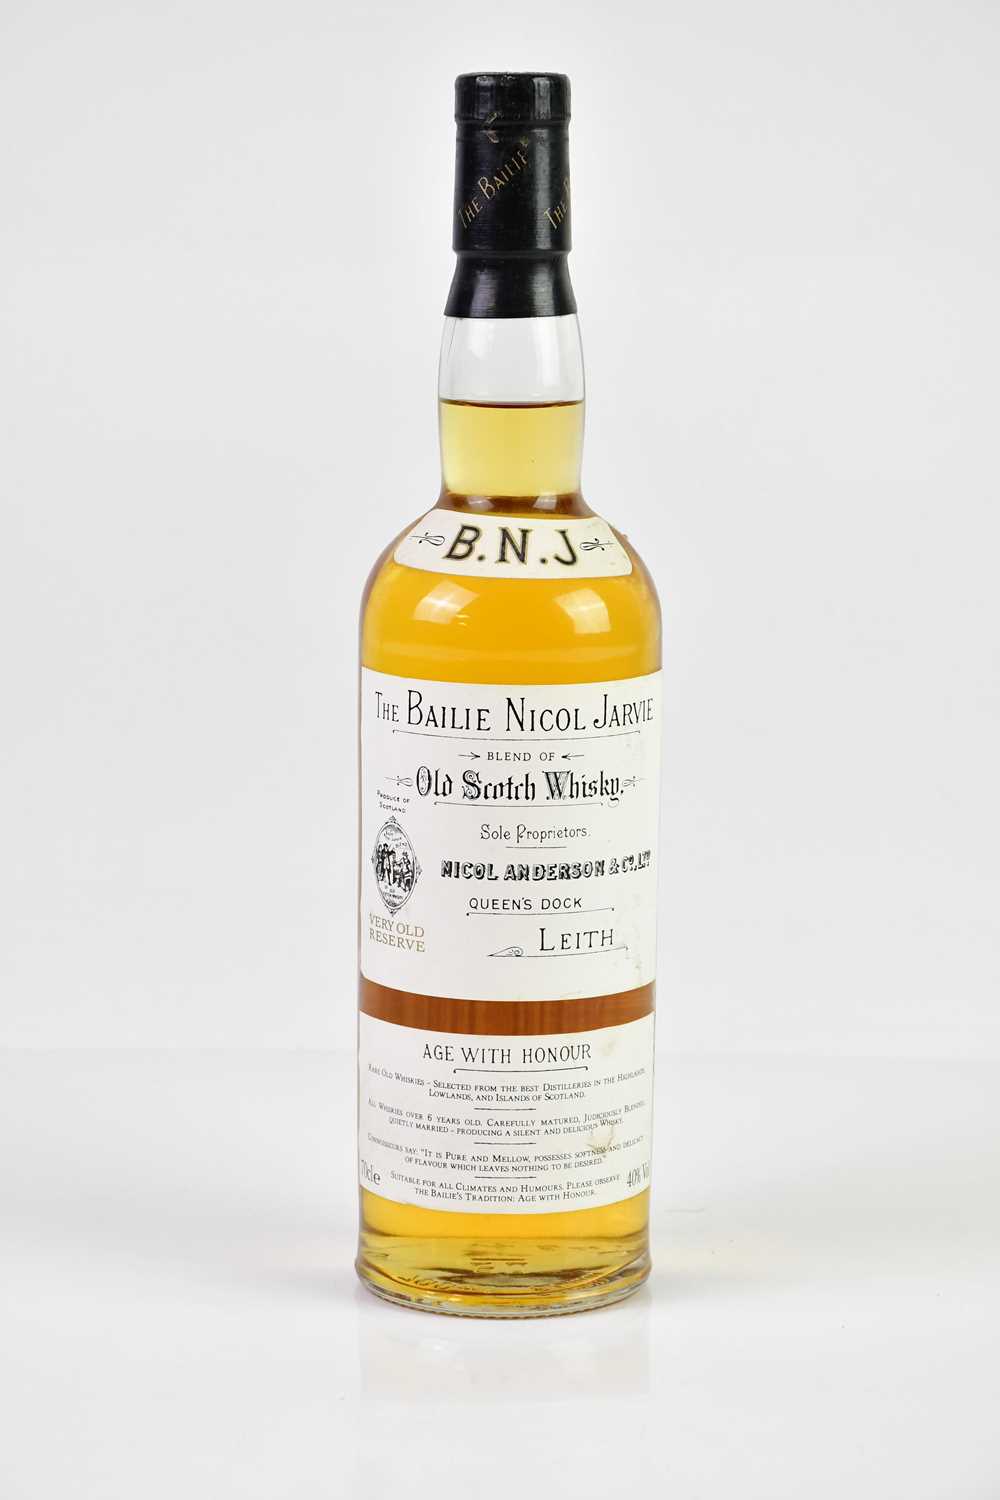 WHISKY; a bottle of The Bailie Nicol Jarvie, blend of Old Scotch whisky 'Very Old Reserve', 40%,